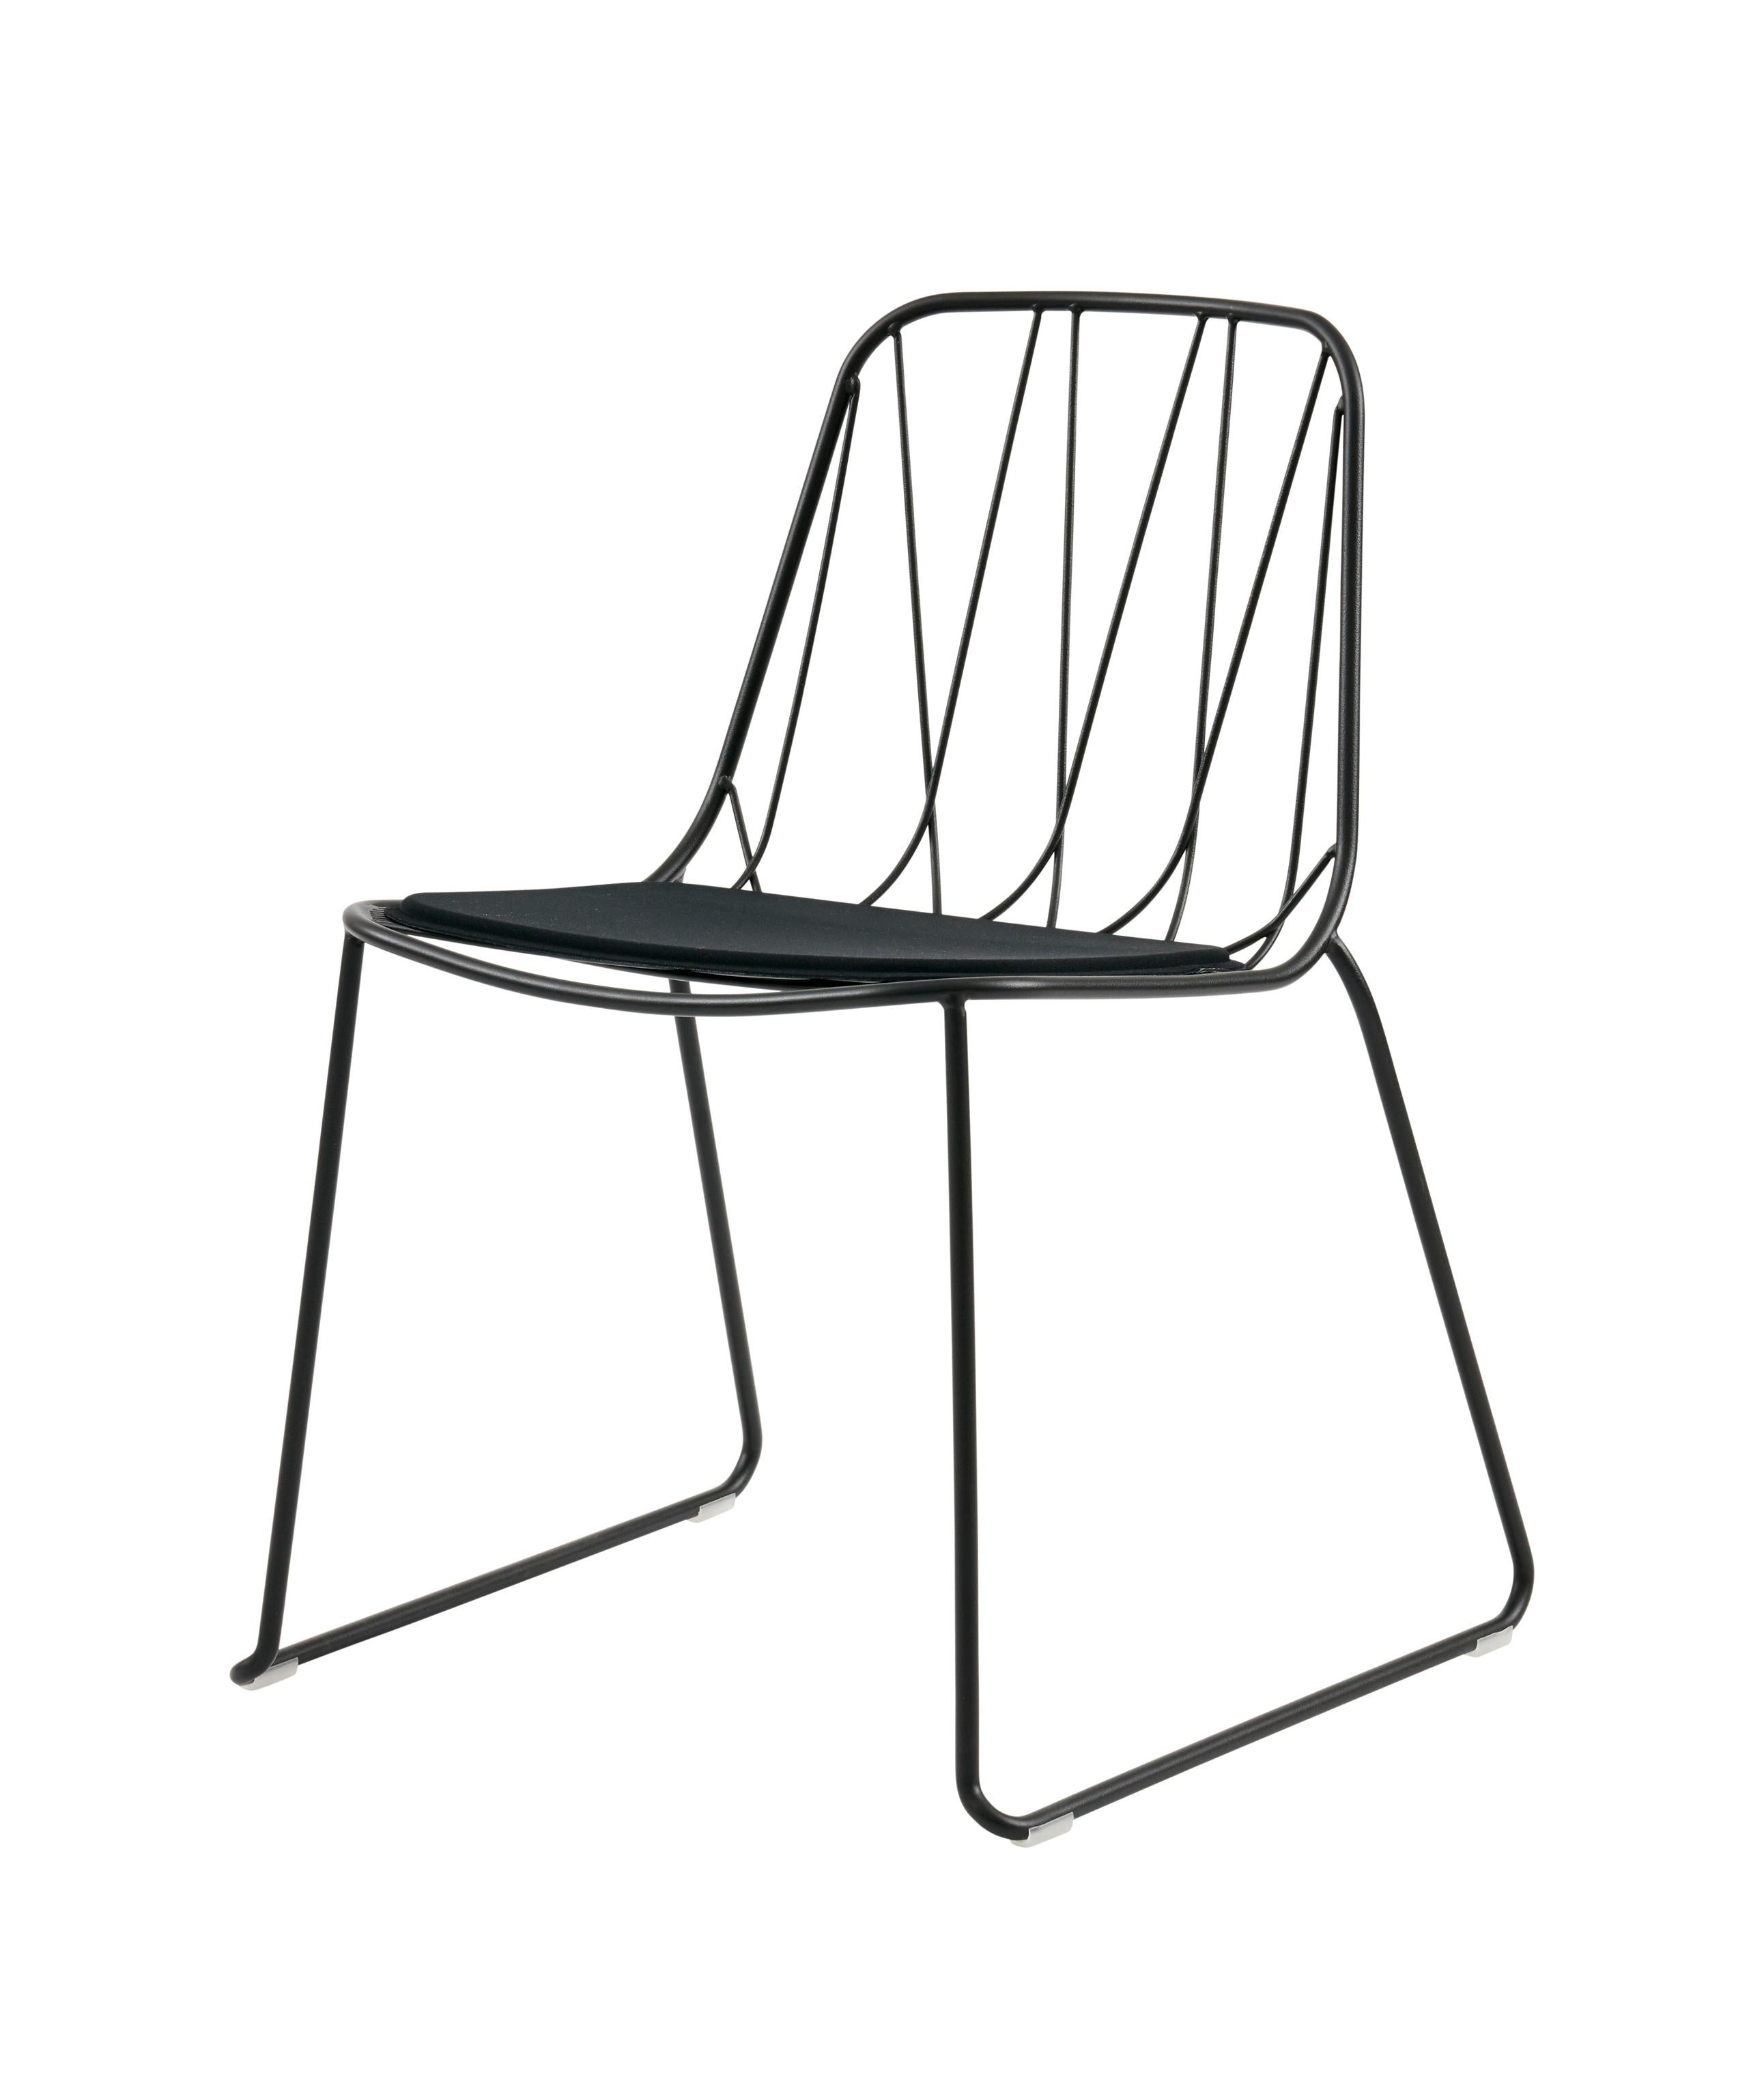 Italian SP01 Chee Chair in Black, Made in Italy For Sale